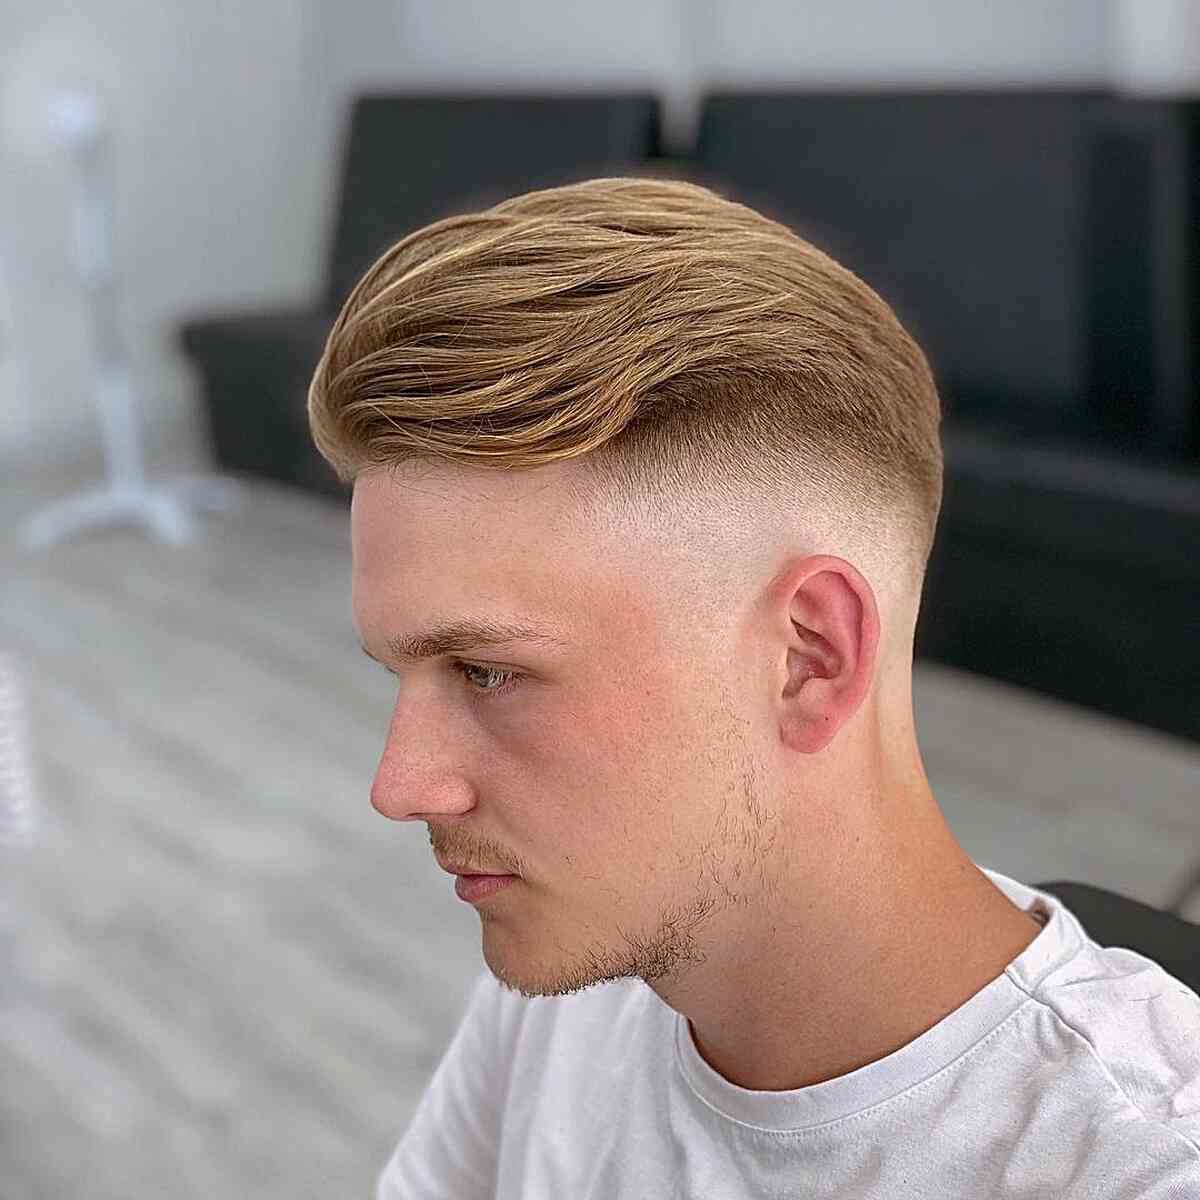 High Skin Fade for Wavy Side Quiff on Men's Thick, Blonde Hair